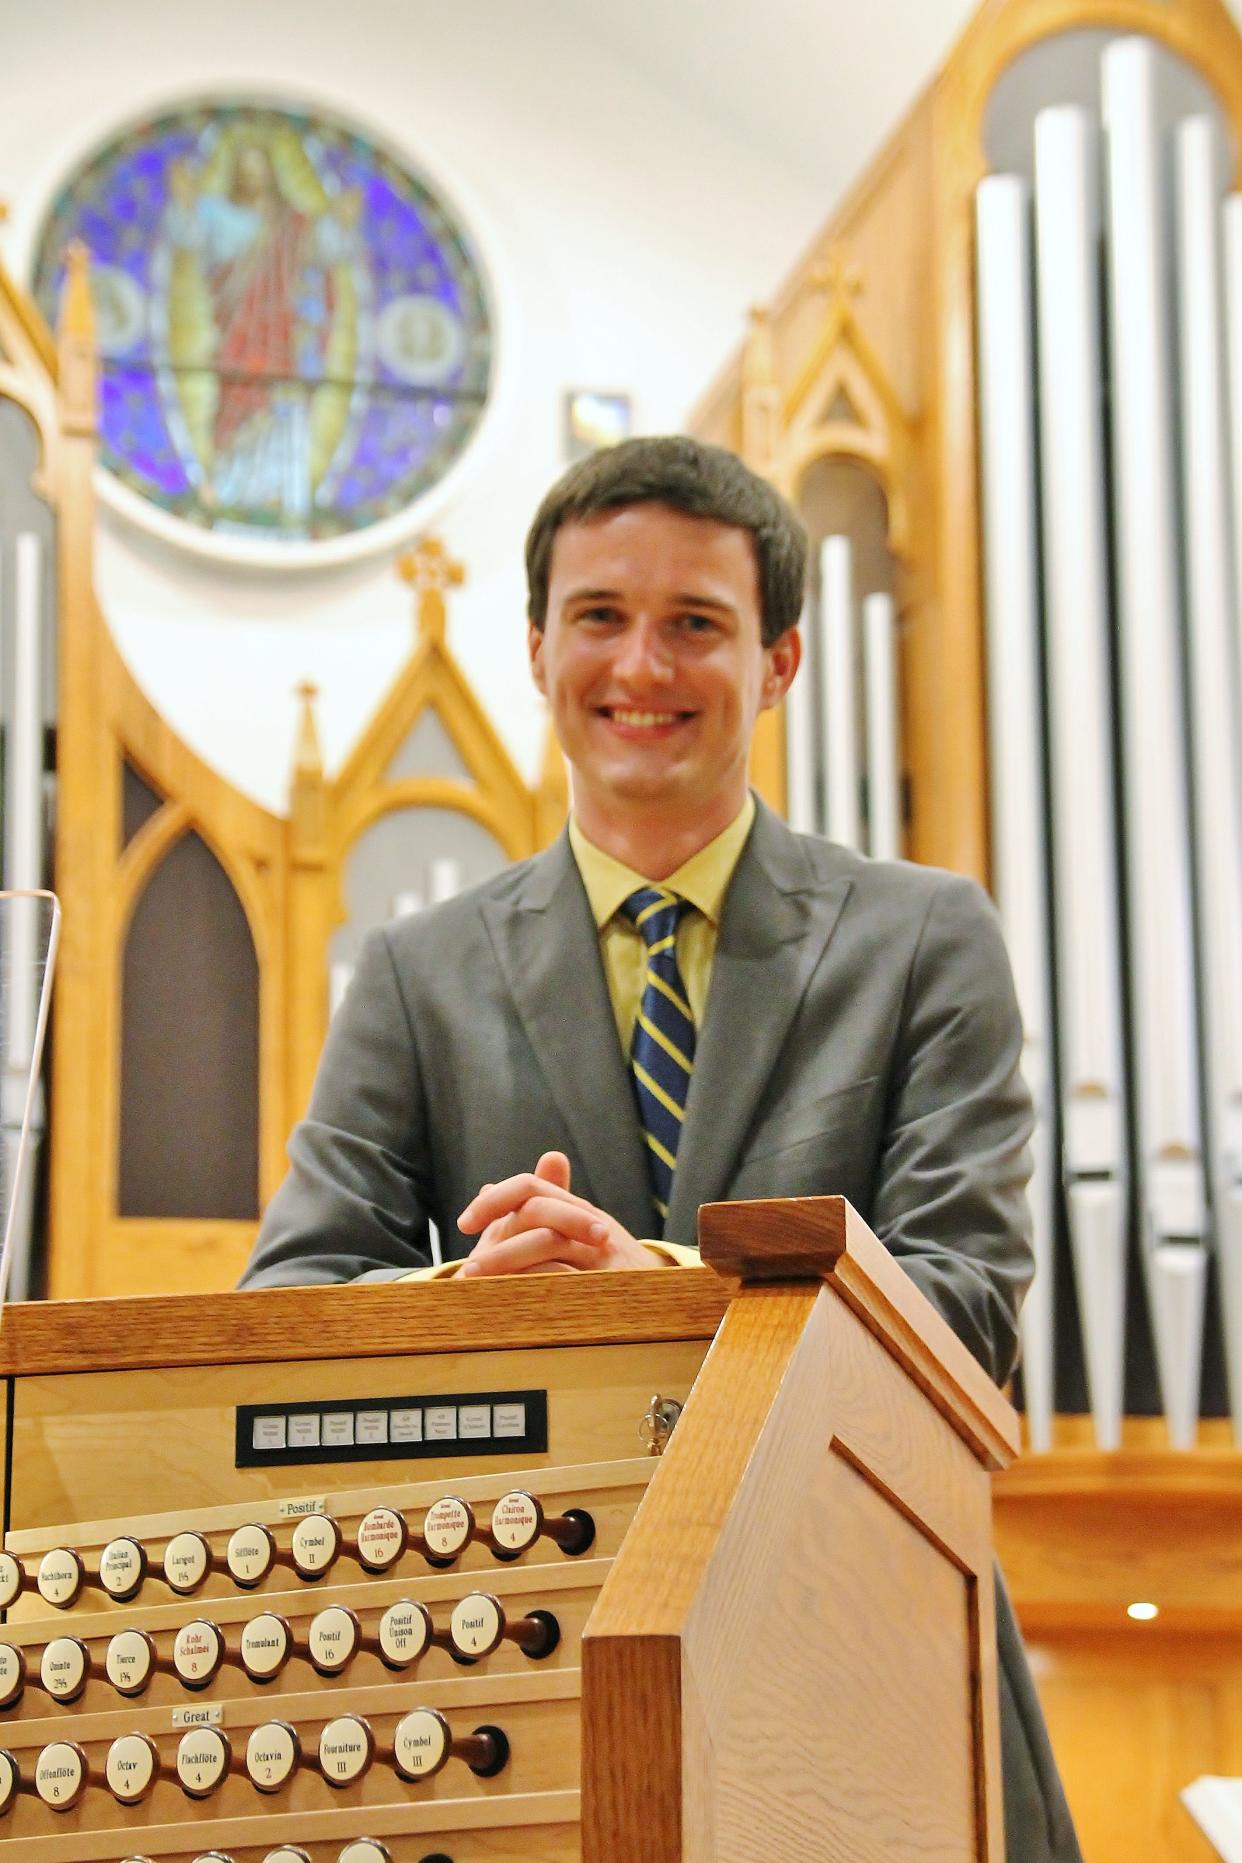 Michael Kearney will play a historic pipe organ in a New Sewickley church.